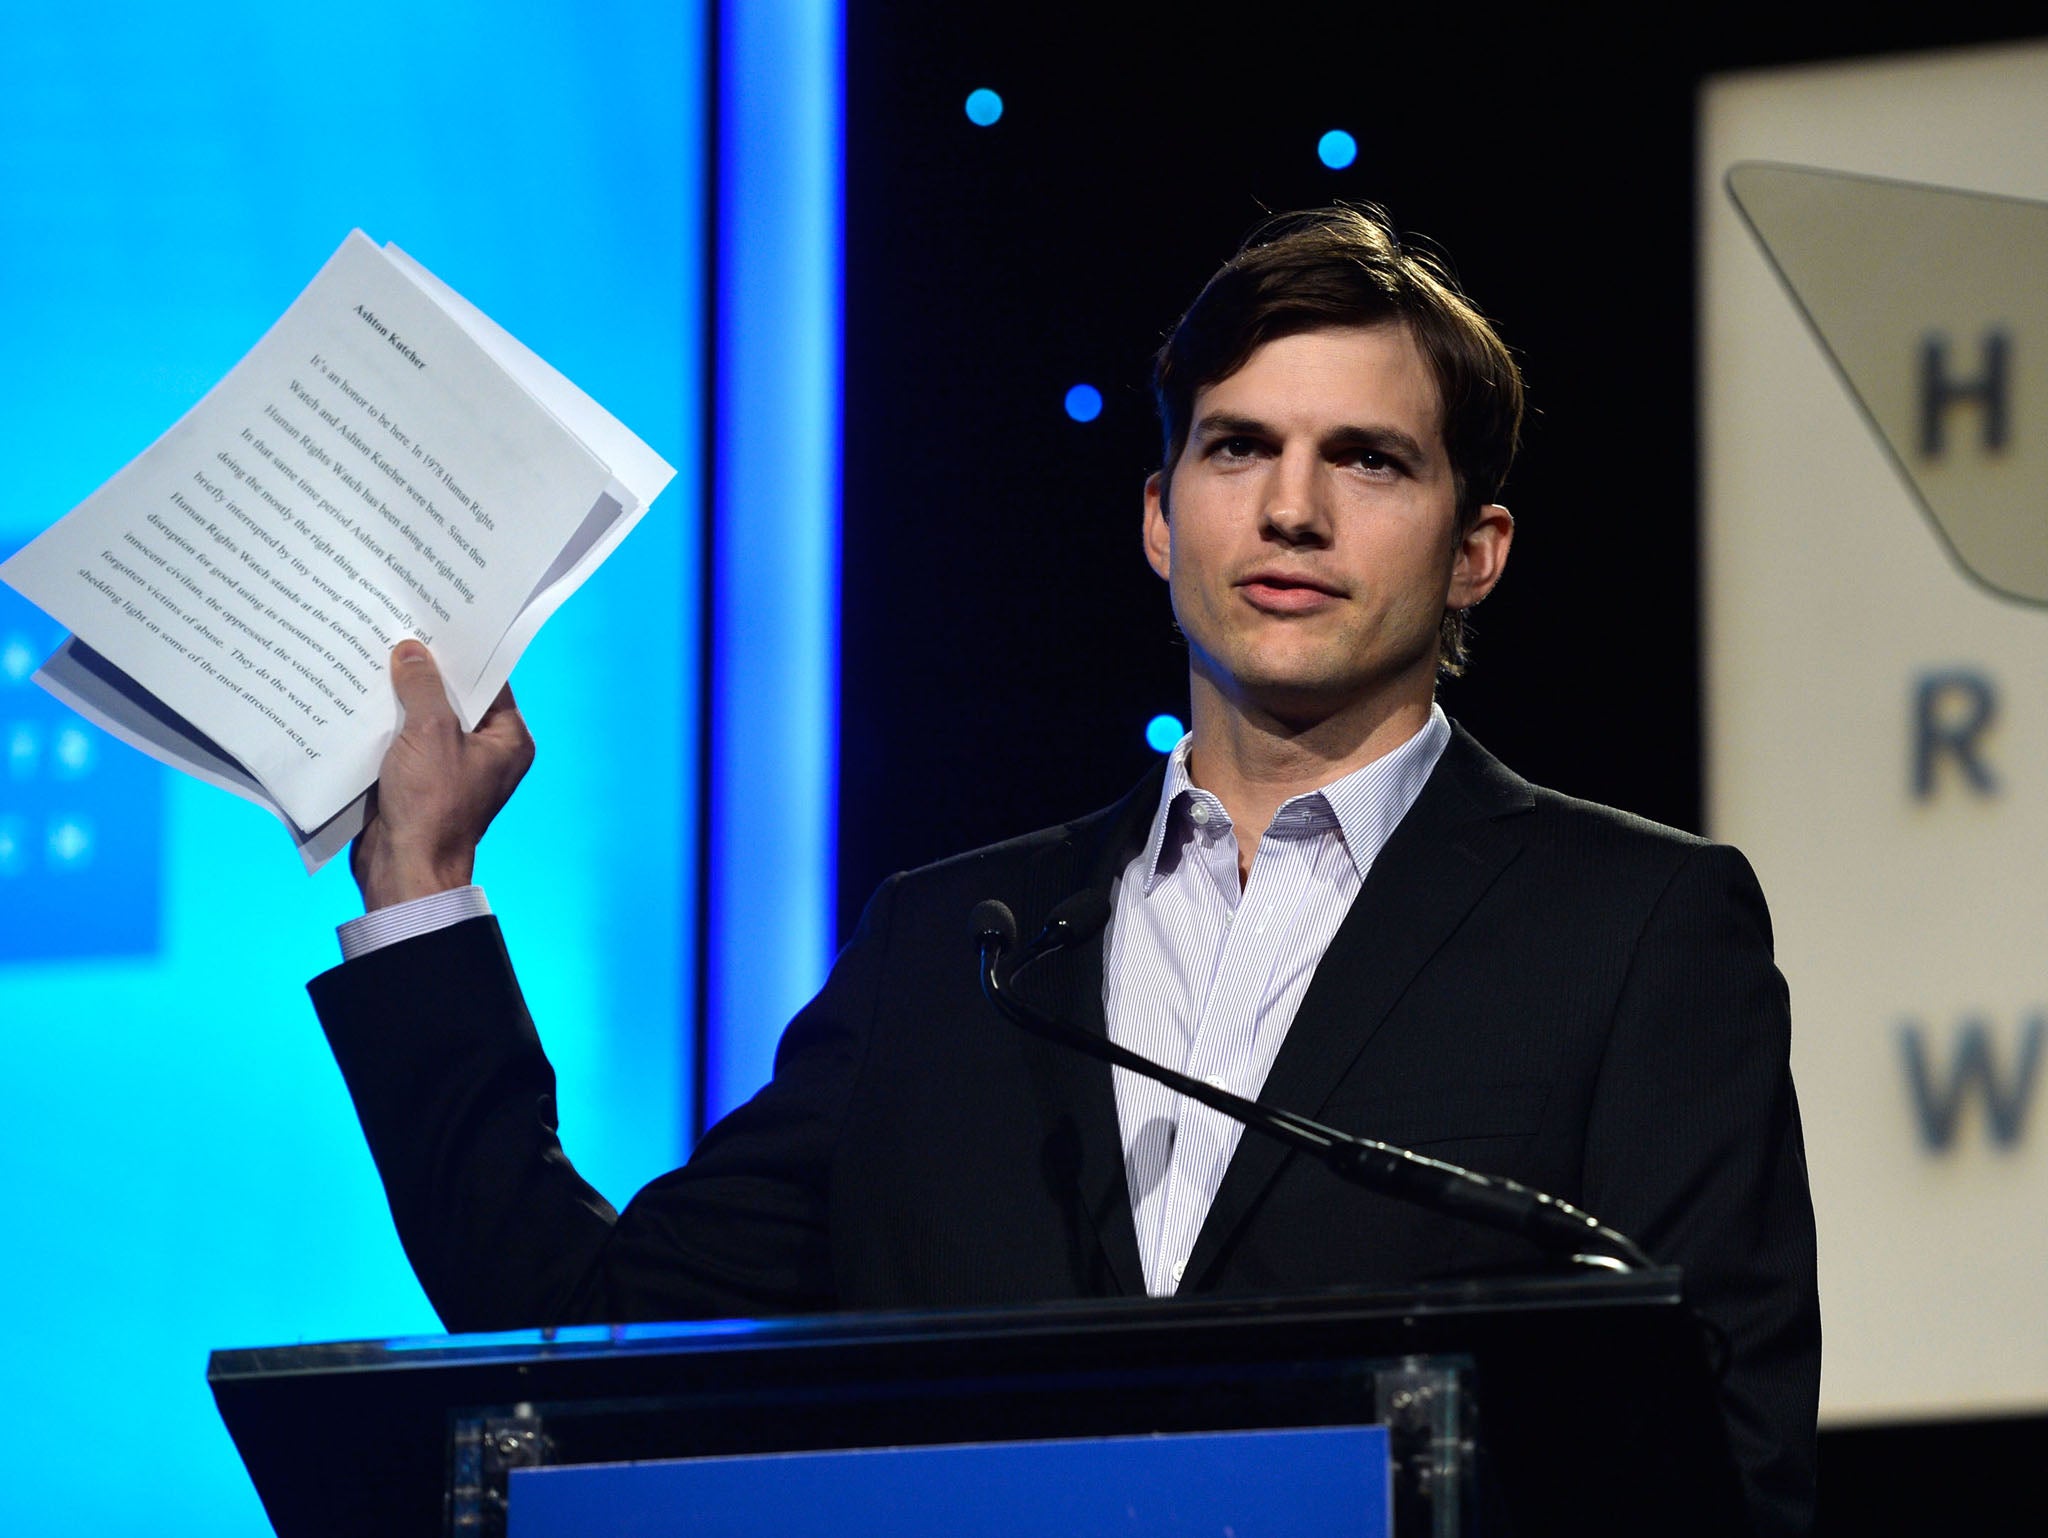 Ashton Kutcher speaking at Human Rights Watch's Voices For Justice dinner in November 2013